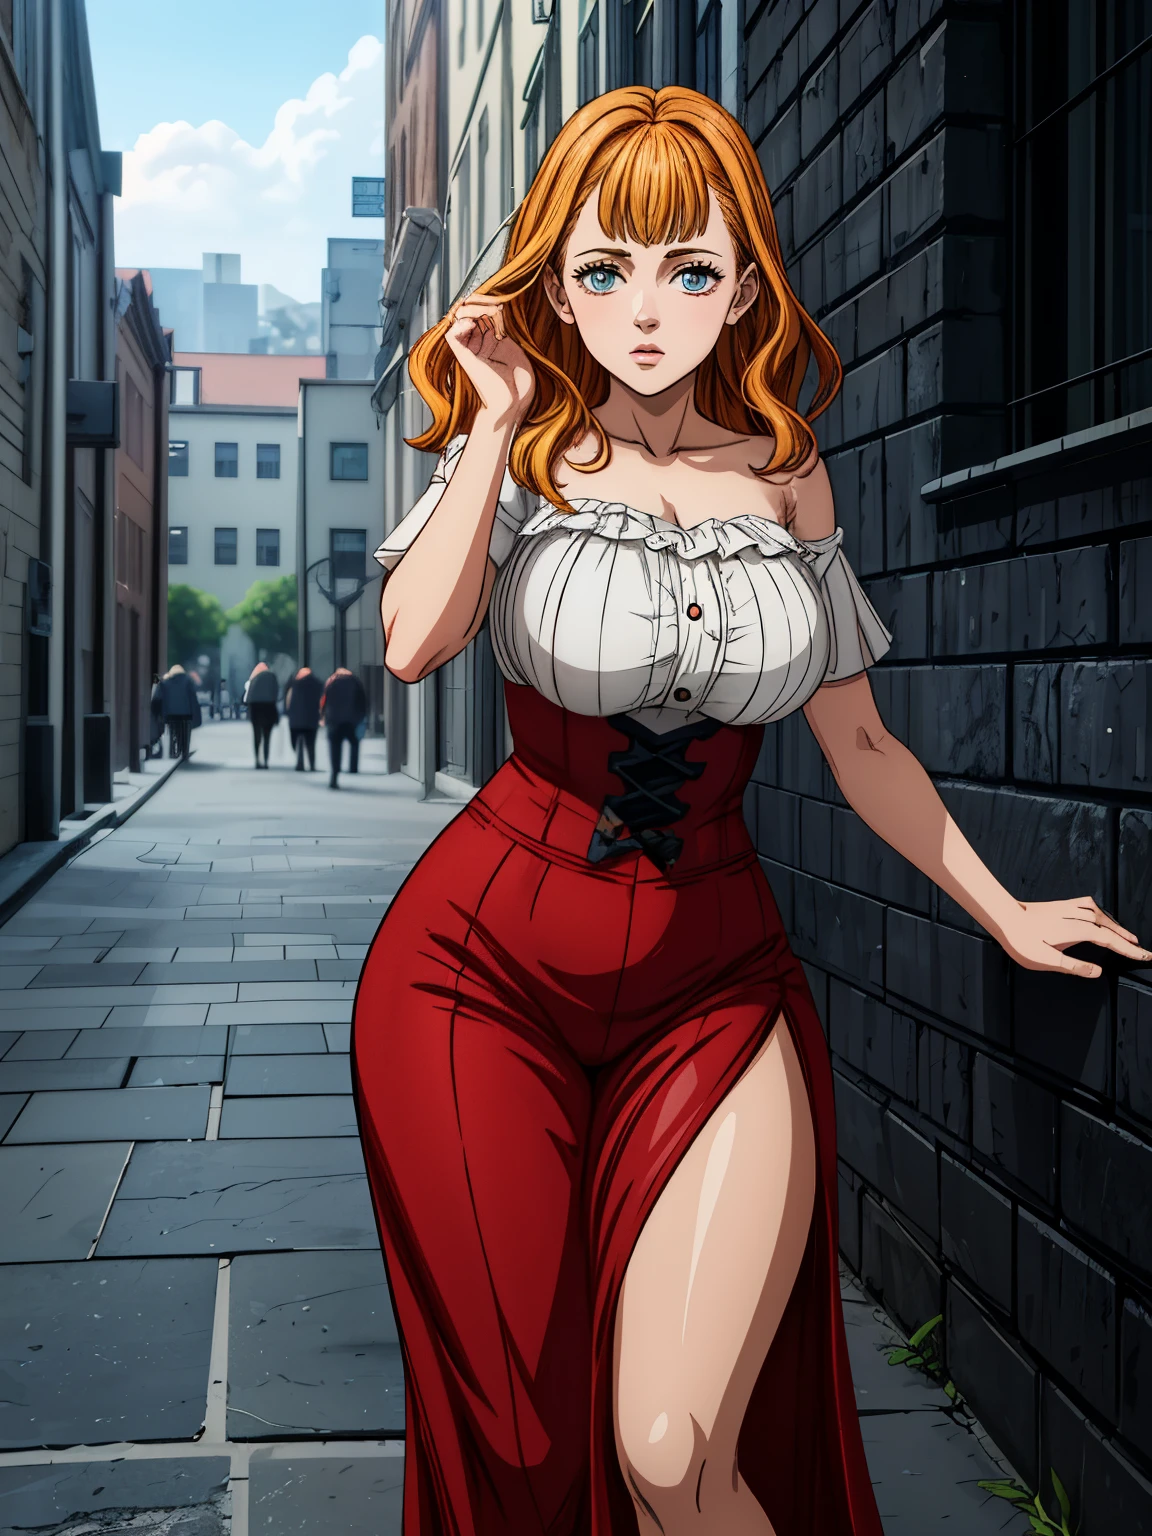 ((masterpiece)), (best quality),, official art, extremely detailed CG unity 8k wallpaper, highly detailed, shiny skin, Depth of field, vivid color,, 1girl, (curvy:1.0), (full body:0.8), girl wearing skirt or dress, sexy , portrait sophie mudd, casual pose, gorgeous young model, cute young woman, a beautiful -aged girl, very pretty model, young , cute young girl, beautiful young girl, beautiful model, long orange hair, light hair, shiny hair, young and cute girl, girl, Mimosa, Black Clover, Mimosa anime, anime, looking at me, wild pose, natural pose, 18+, high shadow texturing, shadows included, looking epic, epic background, epic place, single person, nobody else
